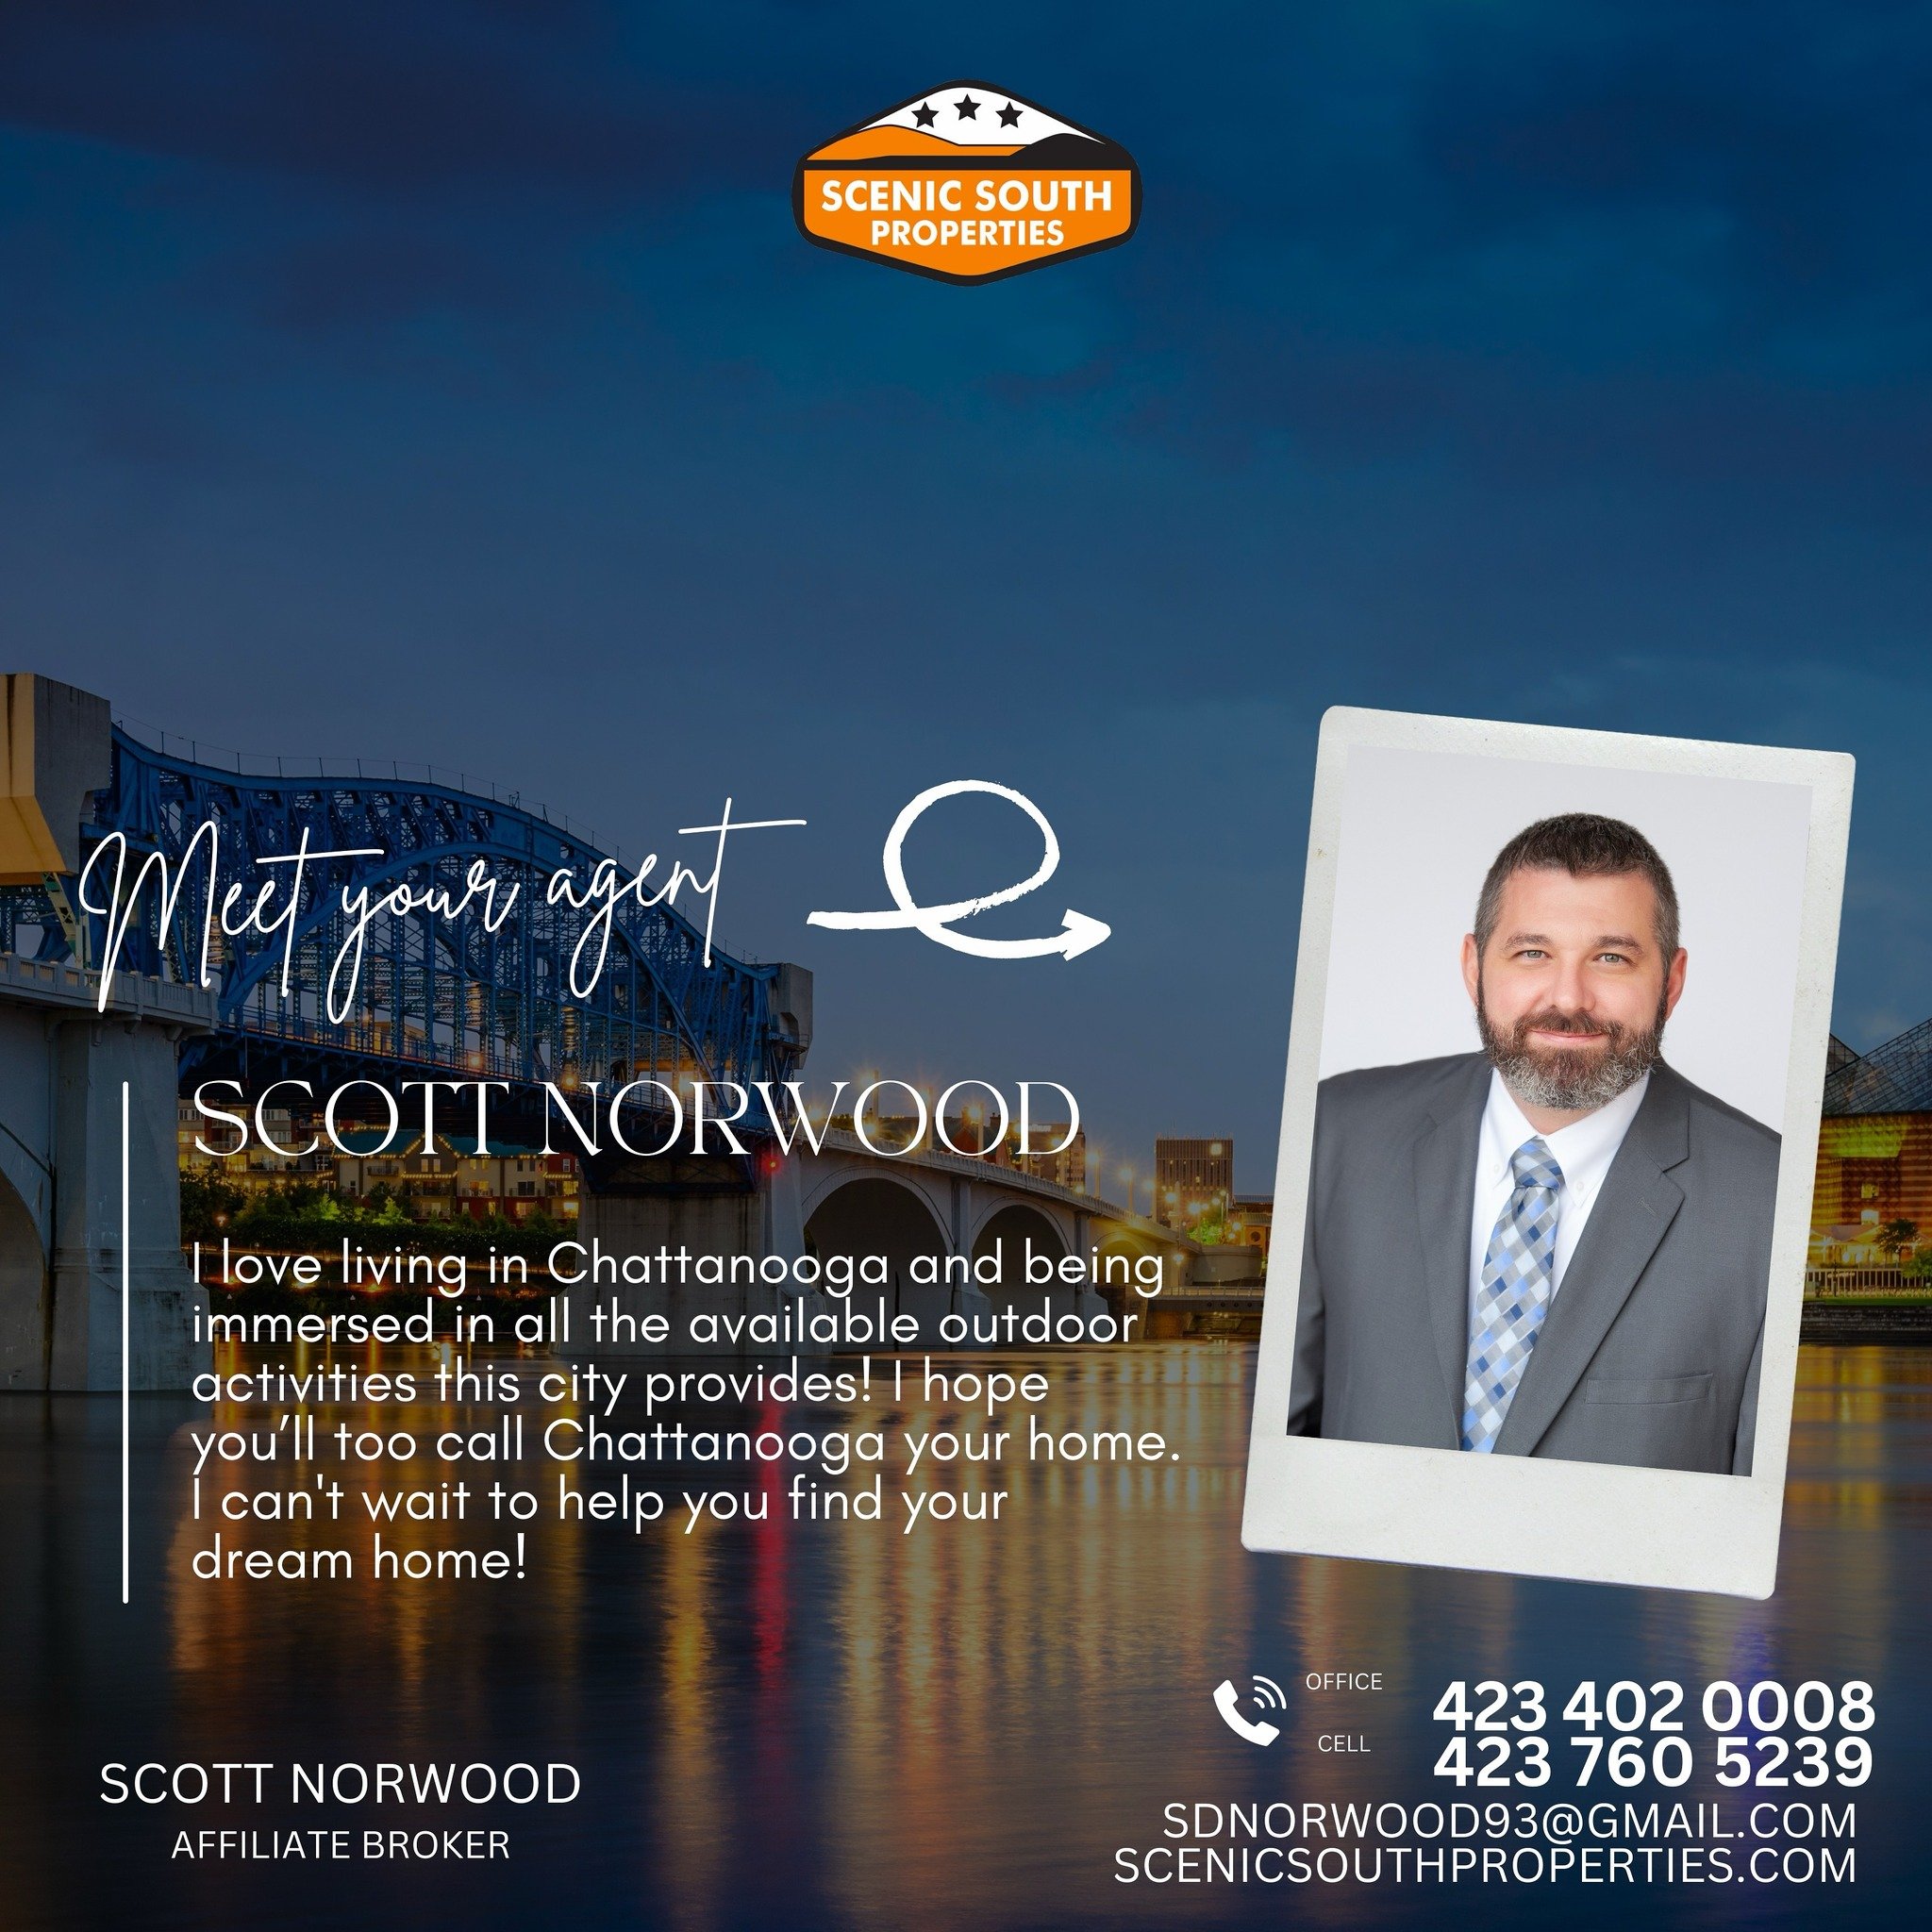 Why do I love Chattanooga???

1) ALL the outdoor activities! 
2) Amazing restaurants and food!
3) Fabulous home and properties - let&rsquo;s find one for you! 

Scott Norwood / Affiliate Broker
Scenic South Properties
423-760-5239 (C)
423-402-0008(O)